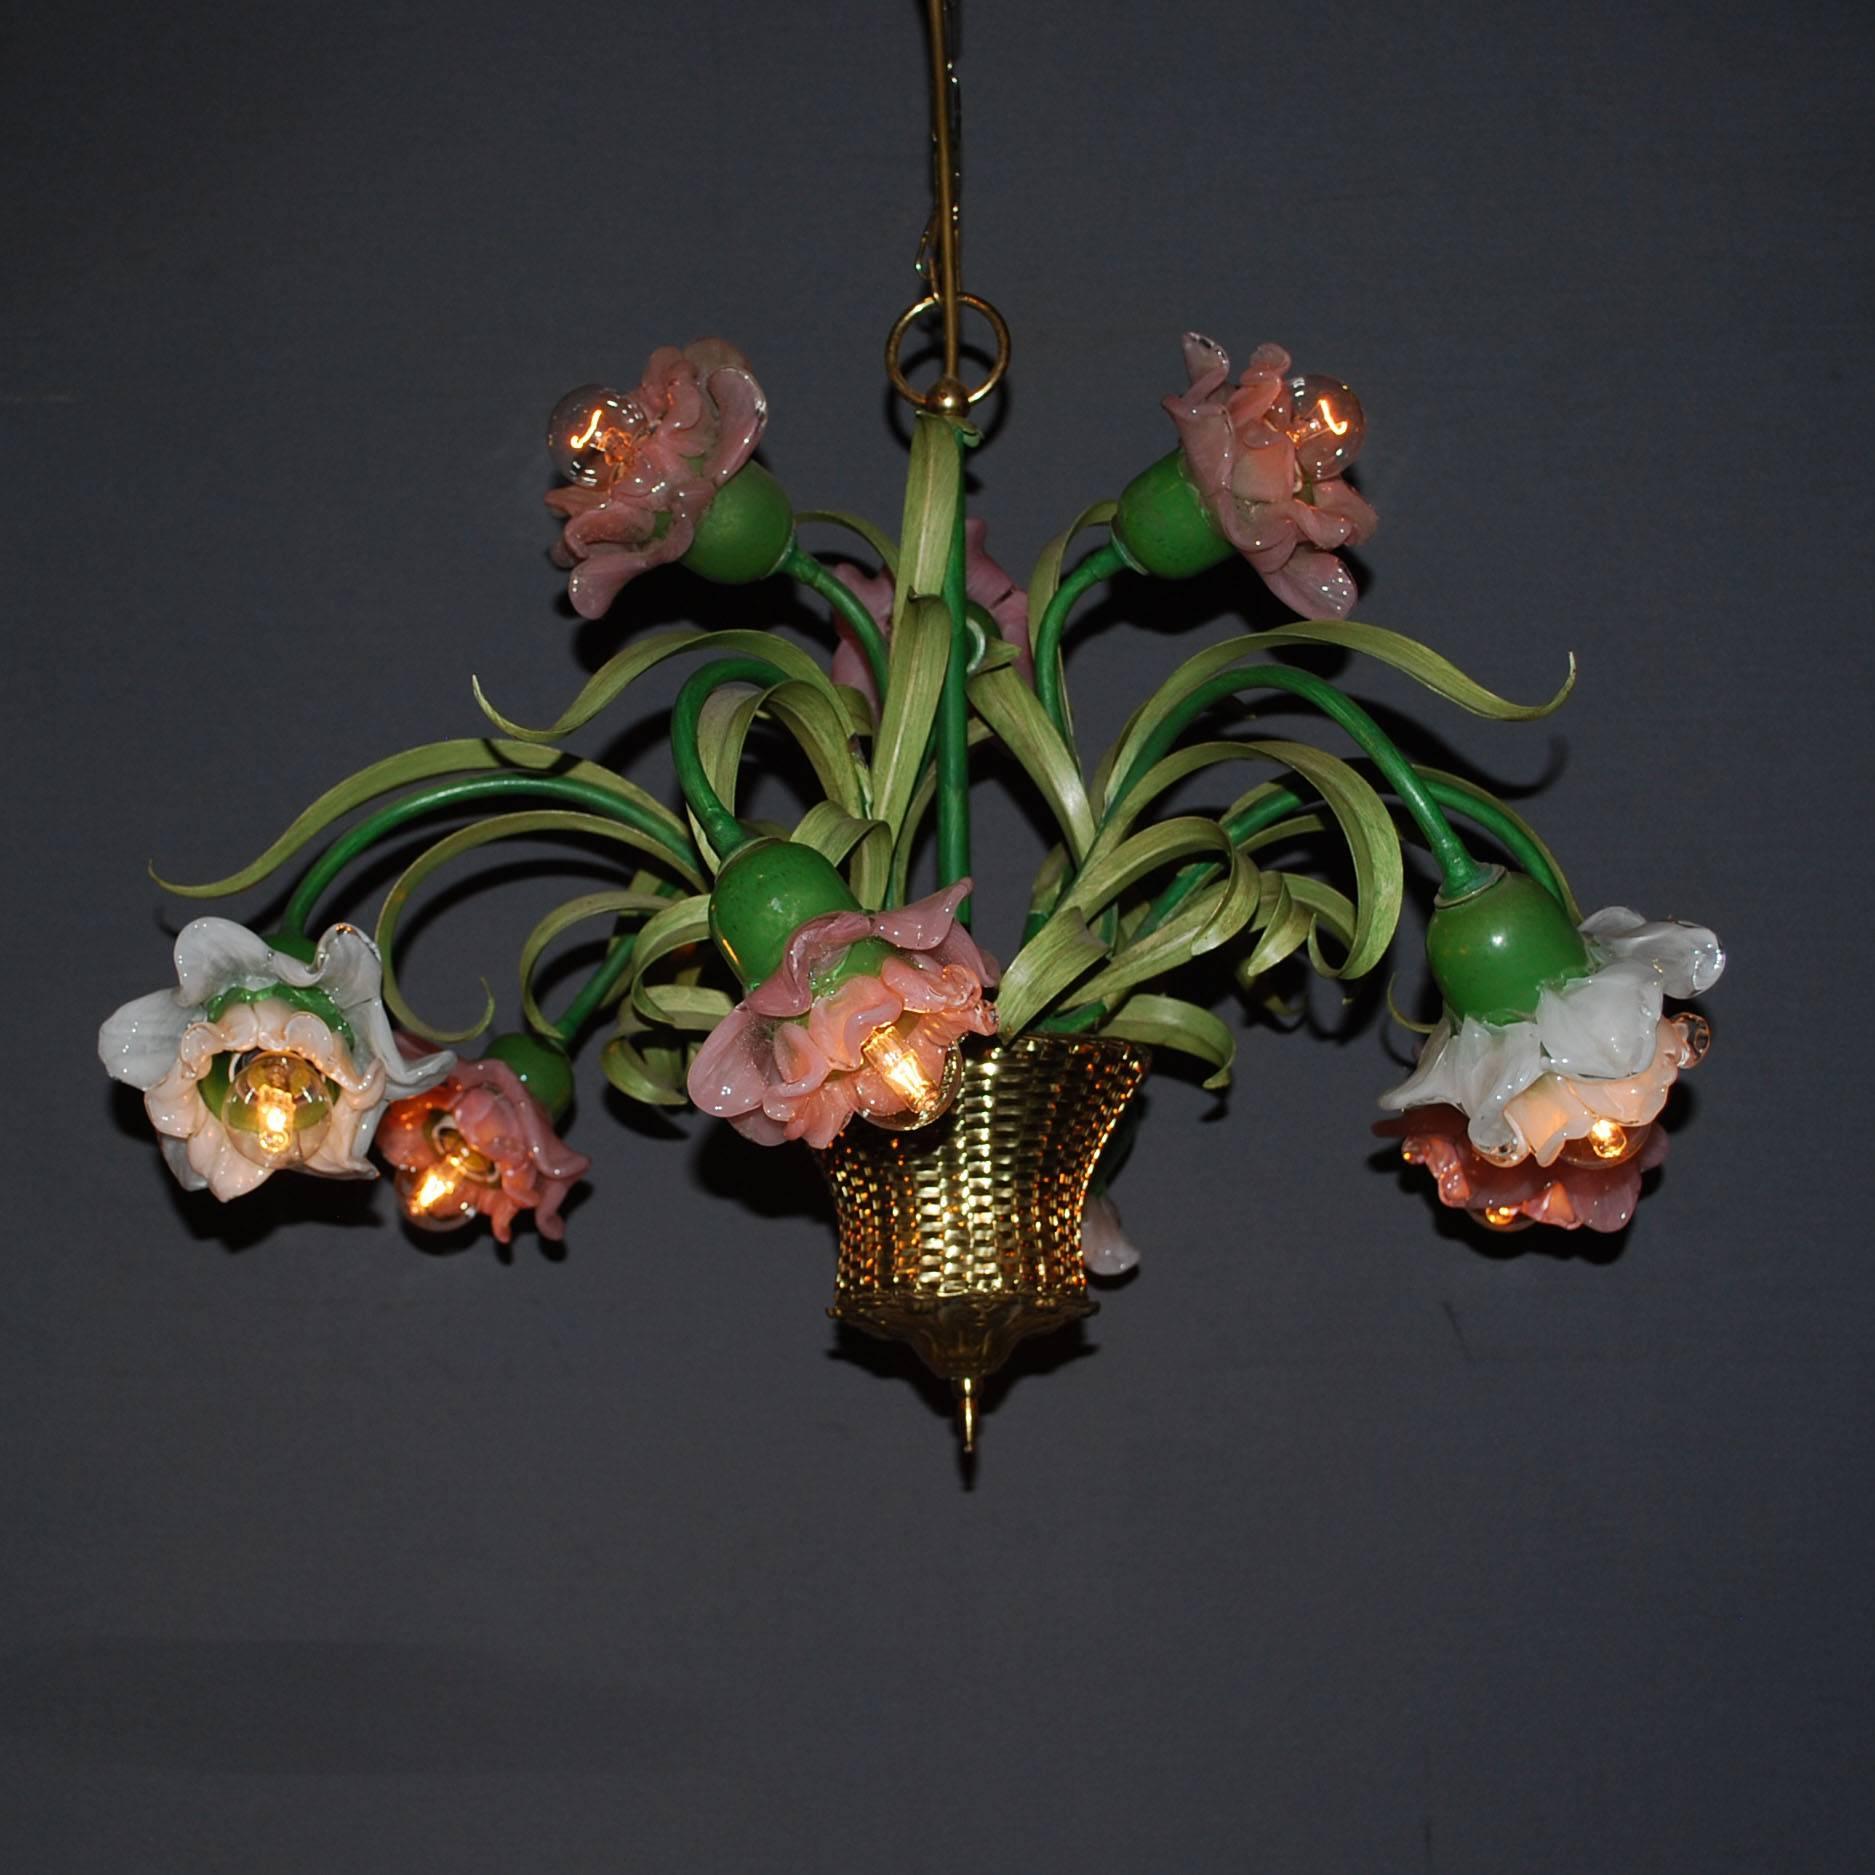 20th century chandelier depicting flowers in a basket.
Flowers are made from hand-painted glass, basket is made from copper.
Nine lights.
Originates France, dating circa 1960.
